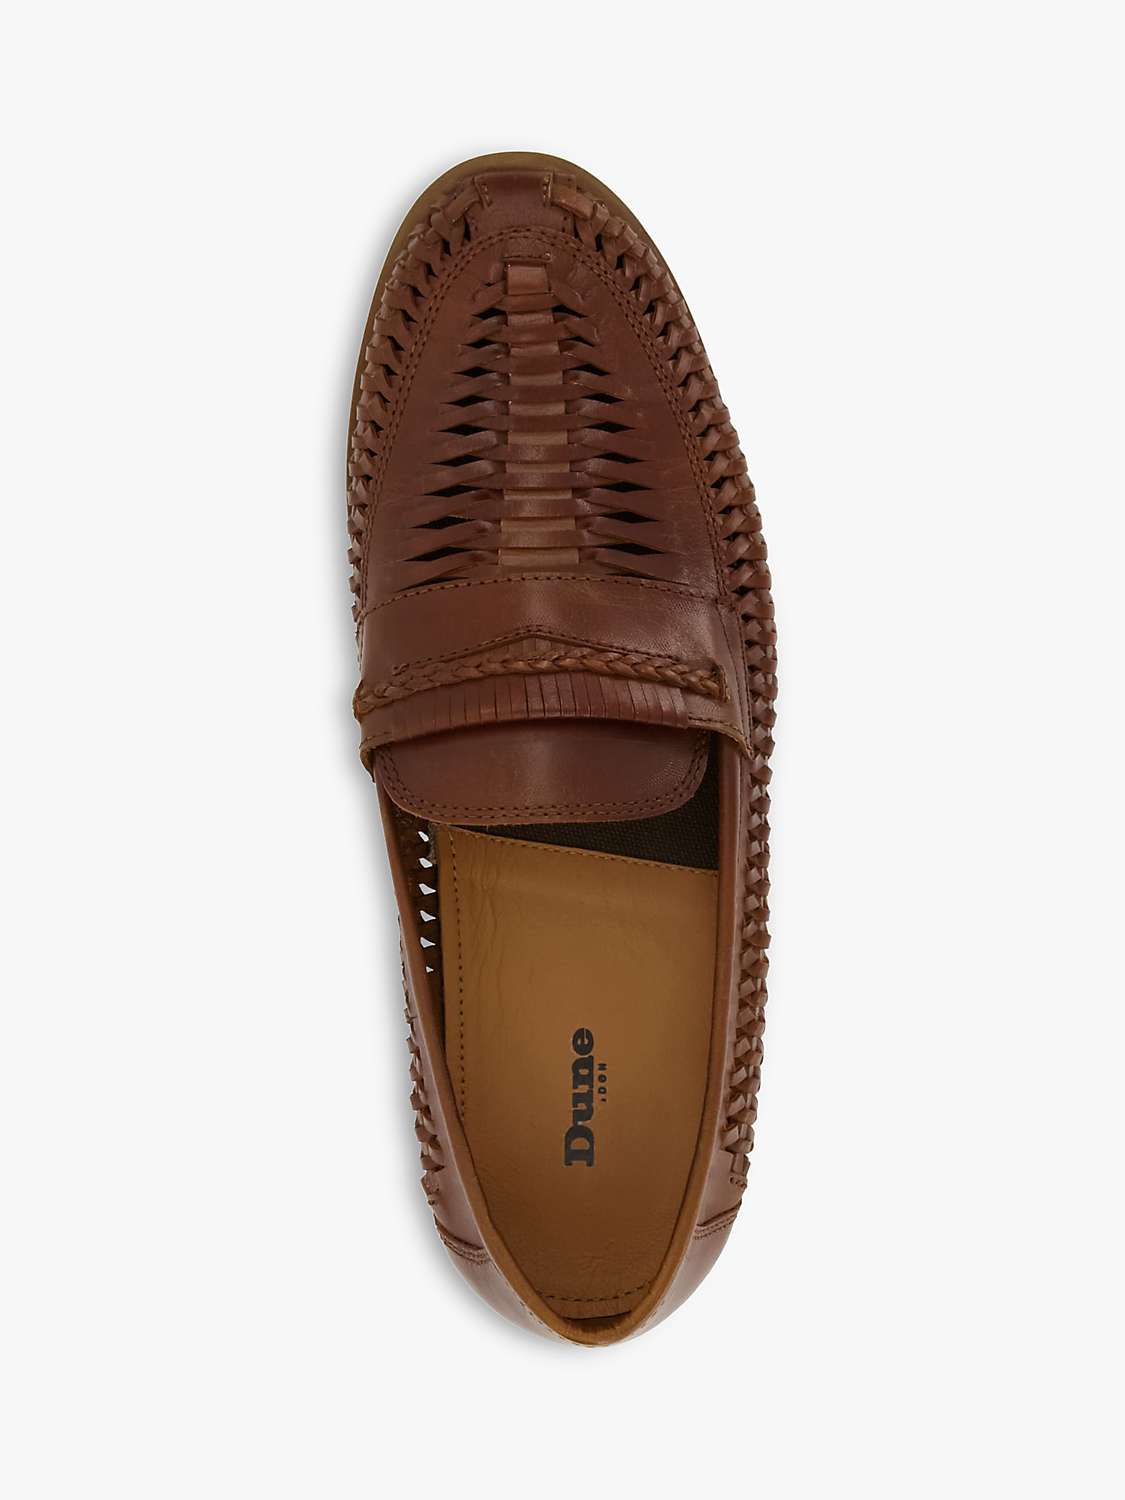 Buy Dune Brickles Casual Woven Loafers Online at johnlewis.com